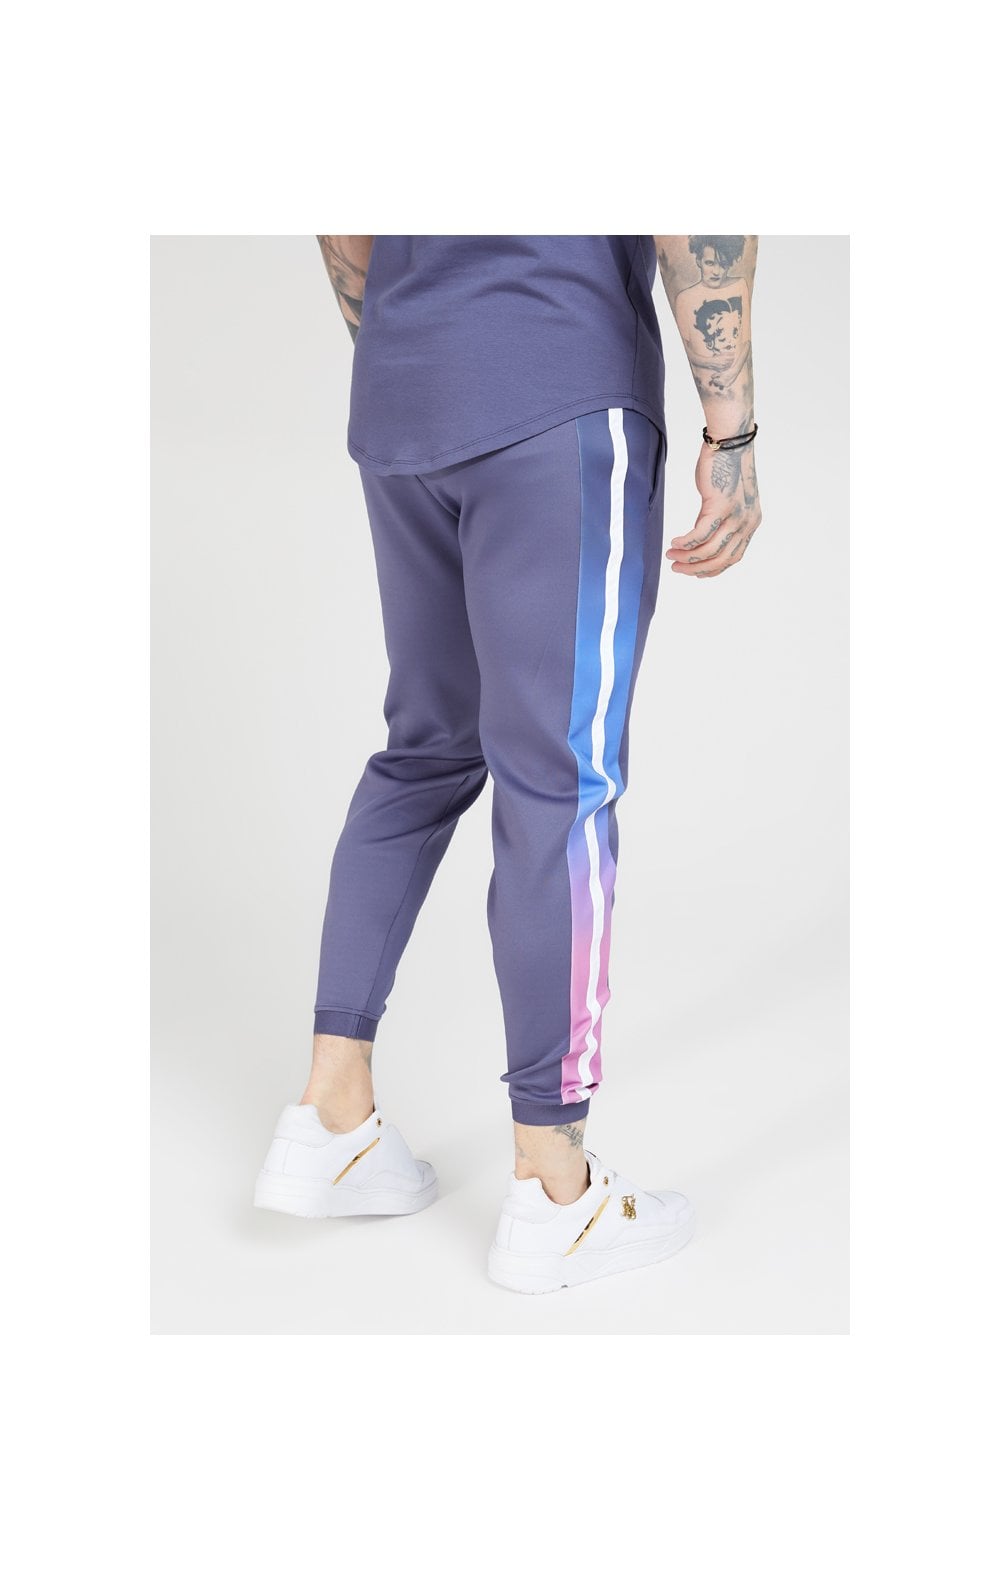 SikSilk Fitted Fade Cuffed Pants – Tri-Neon Fade (1)